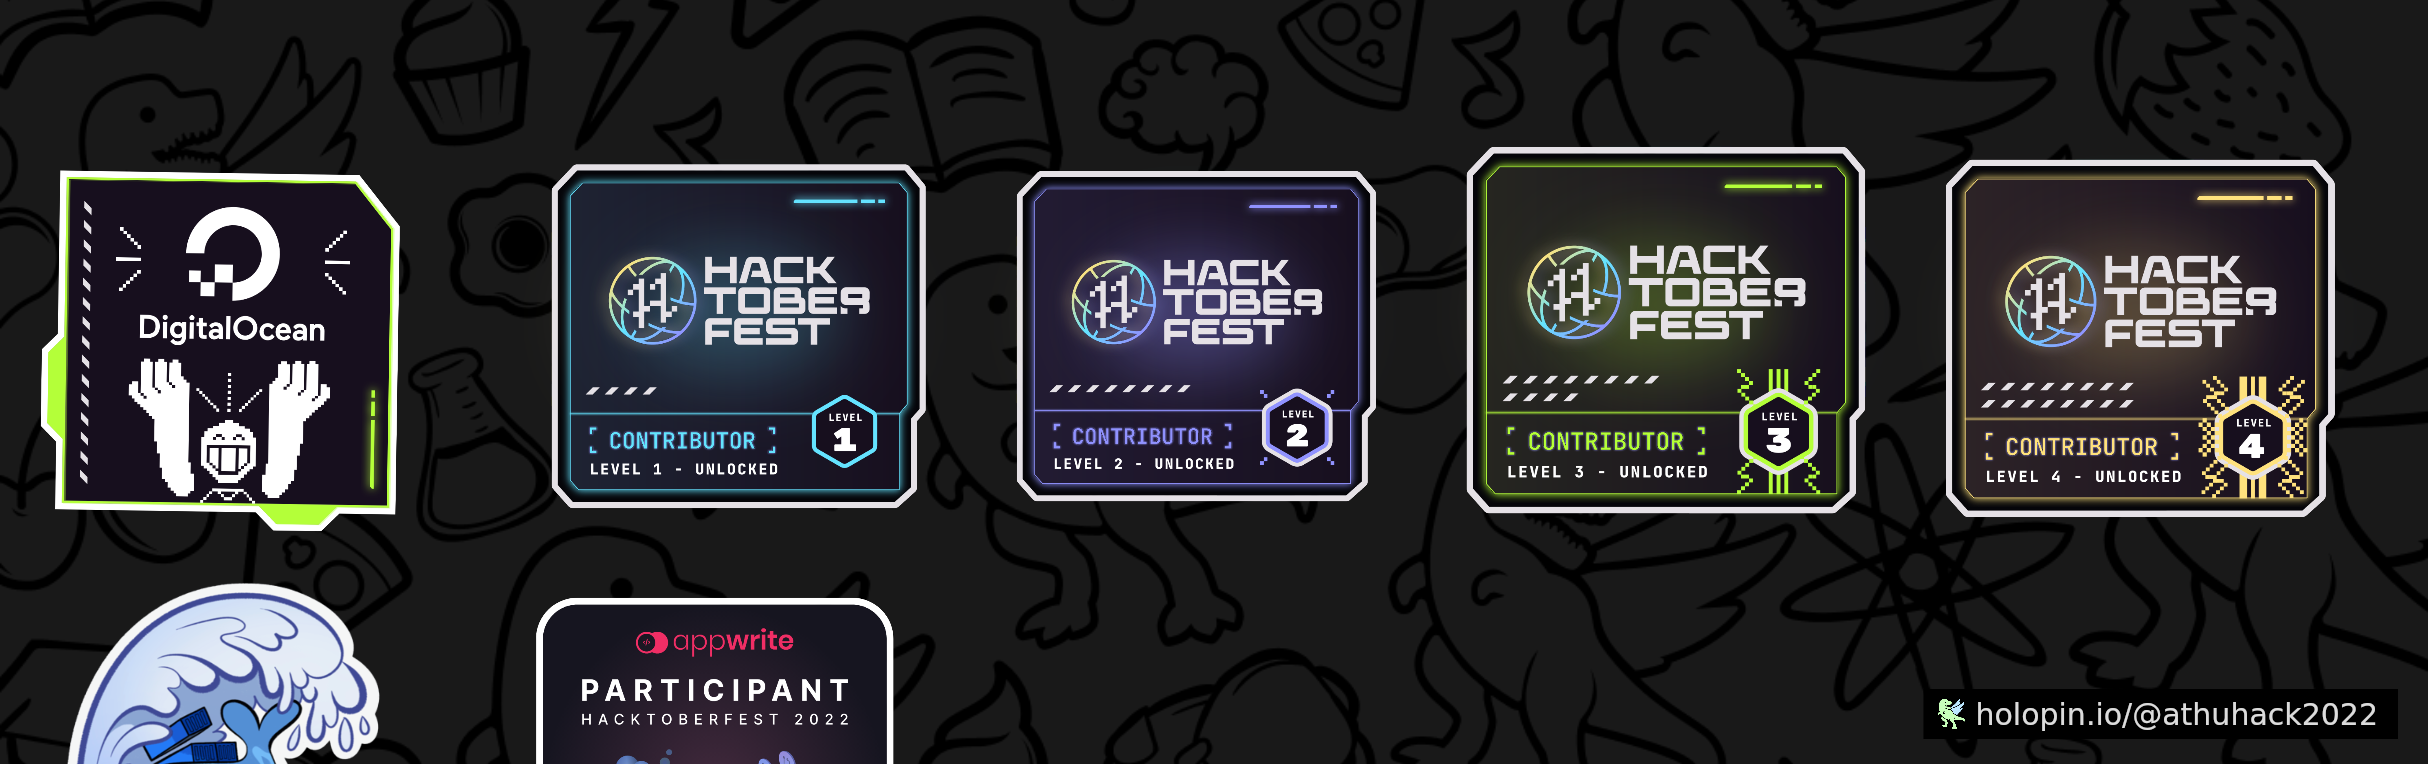 An image of @athuhack2022's Holopin badges, which is a link to view their full Holopin profile